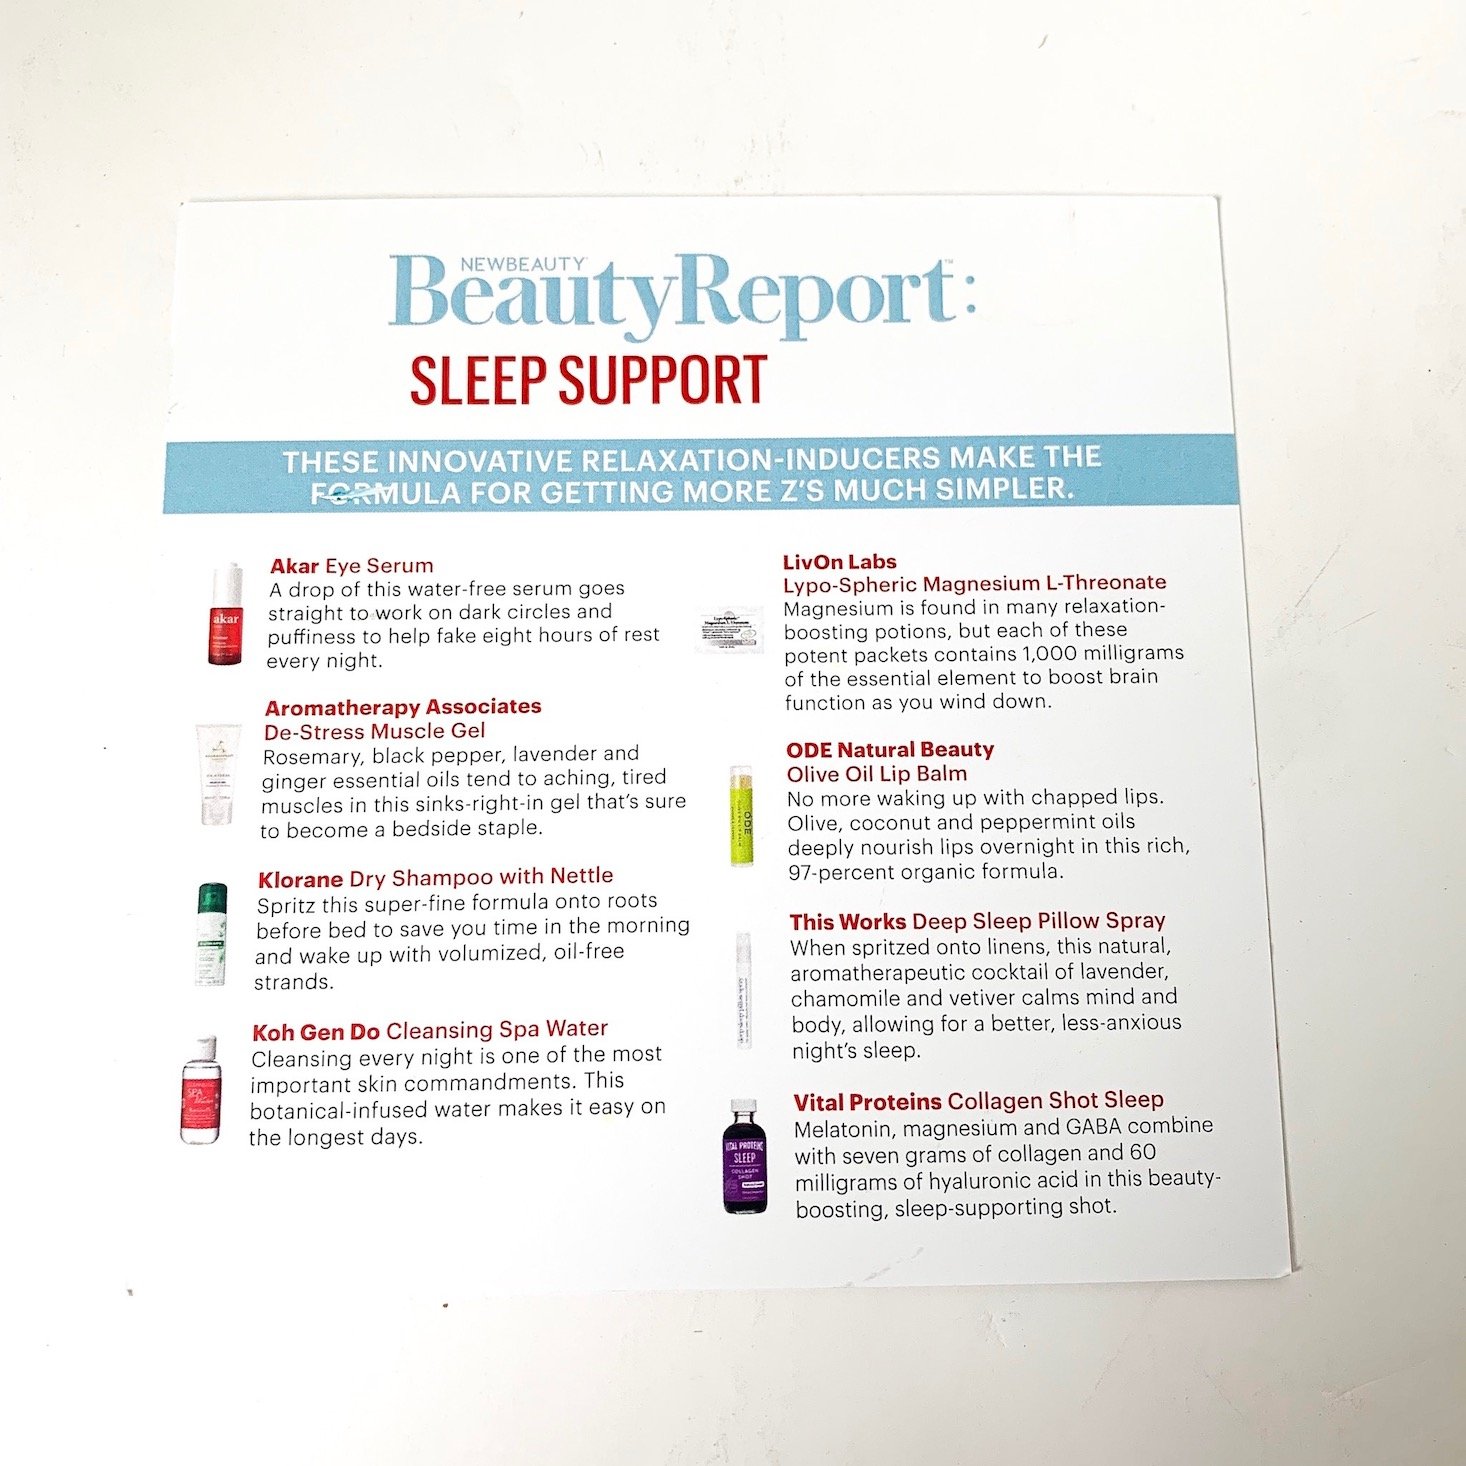 The Beauty Report Sleep Support Box - Infromation Card Top